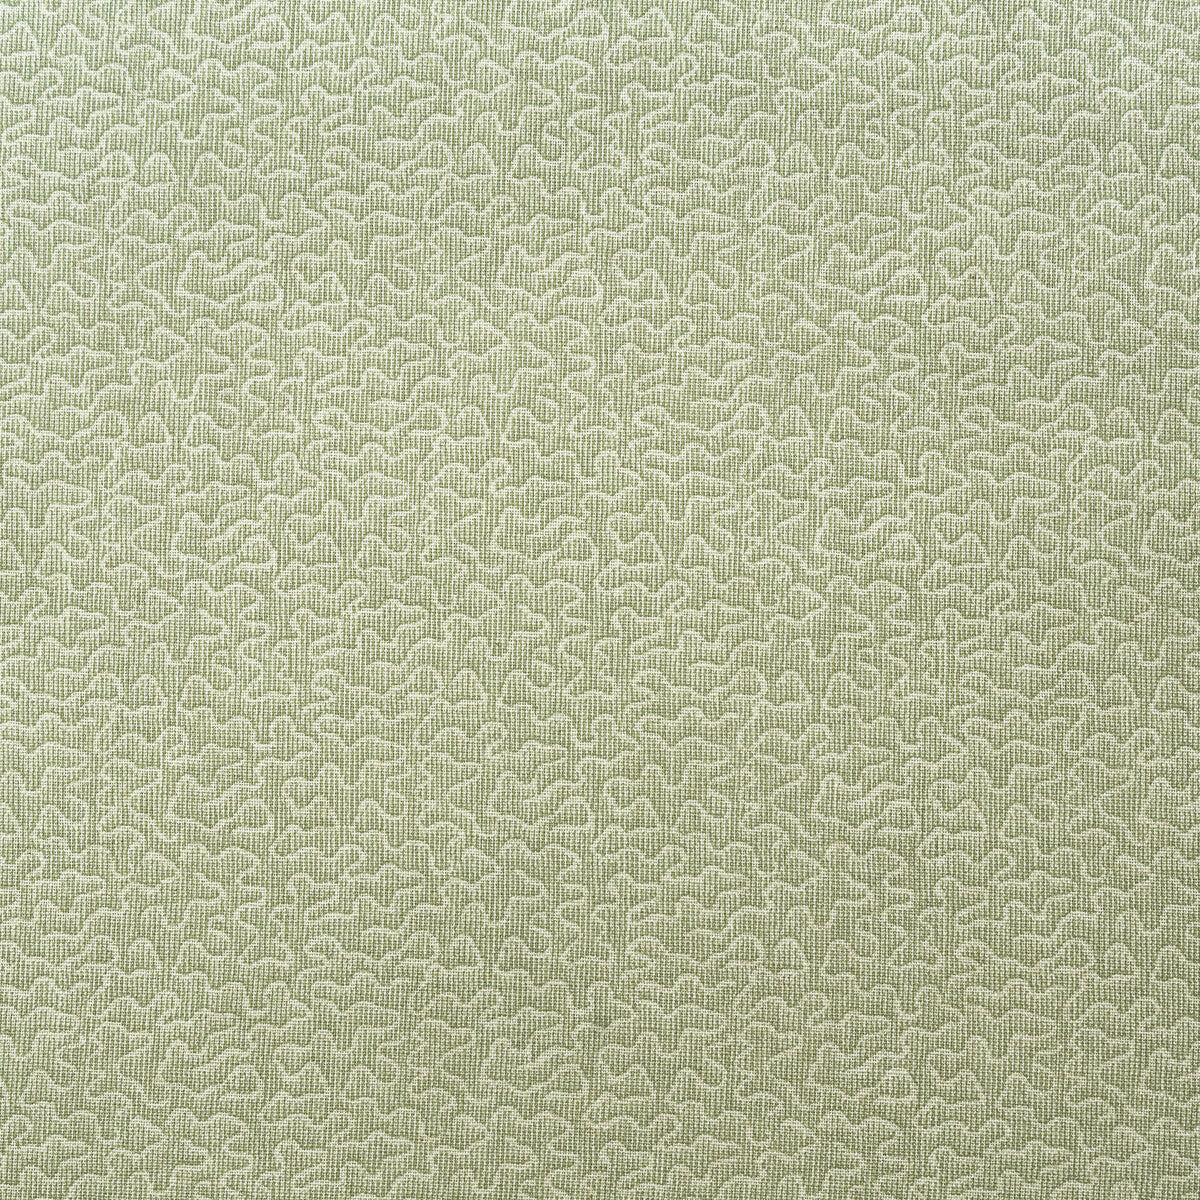 Pollen fabric in fennel color - pattern AM100383.123.0 - by Kravet Couture in the Andrew Martin Garden Path collection